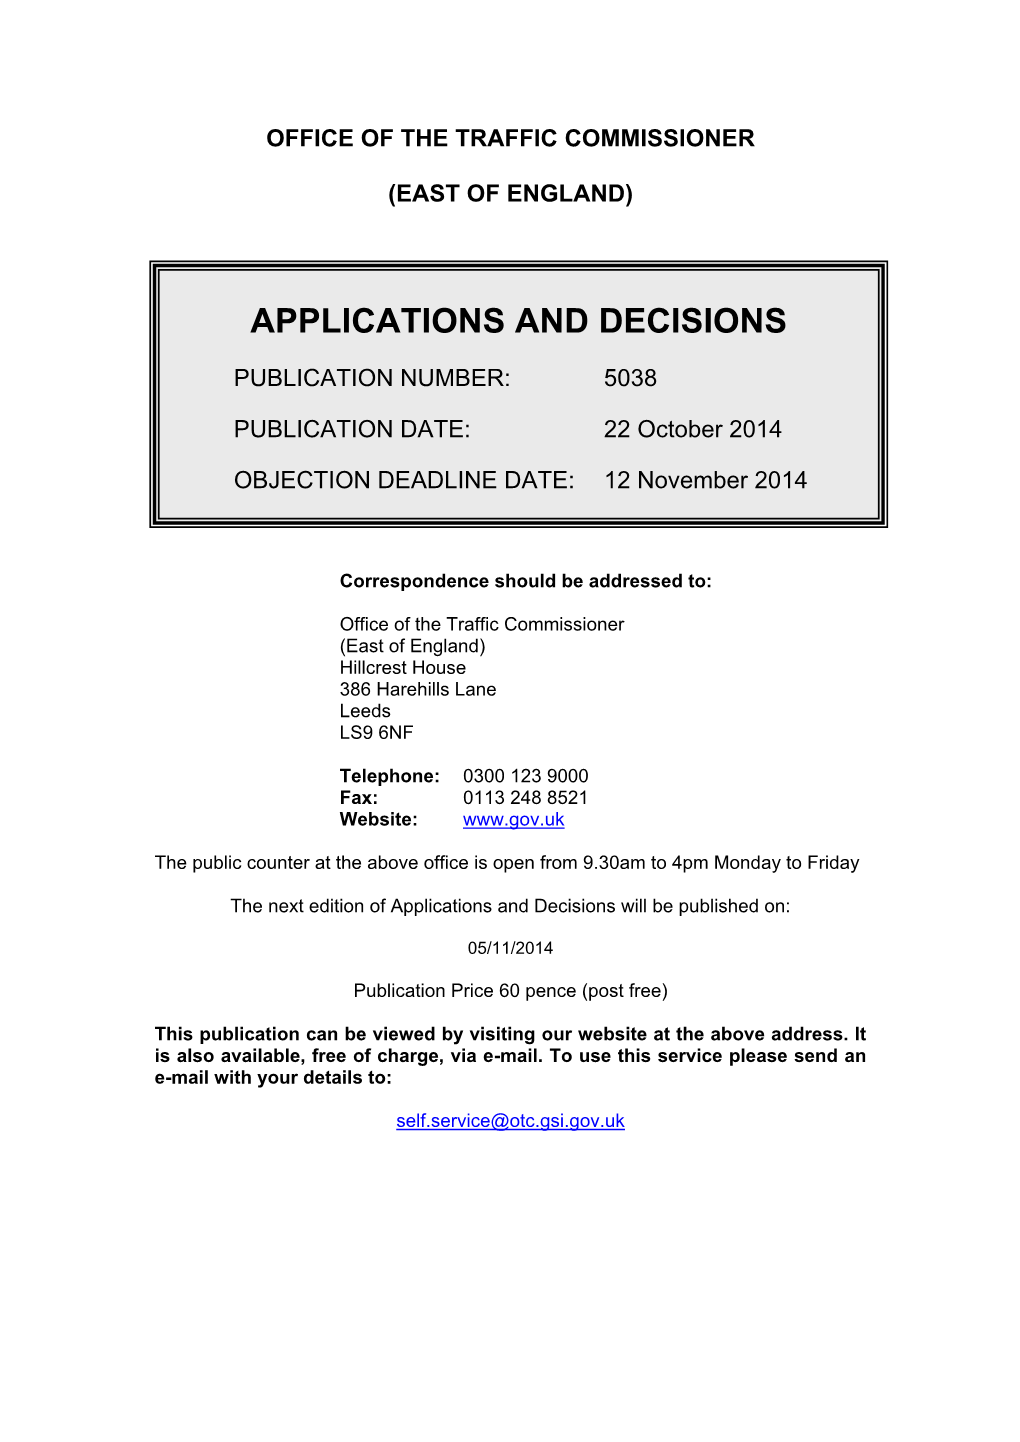 Applications and Decisions 22 October 2014